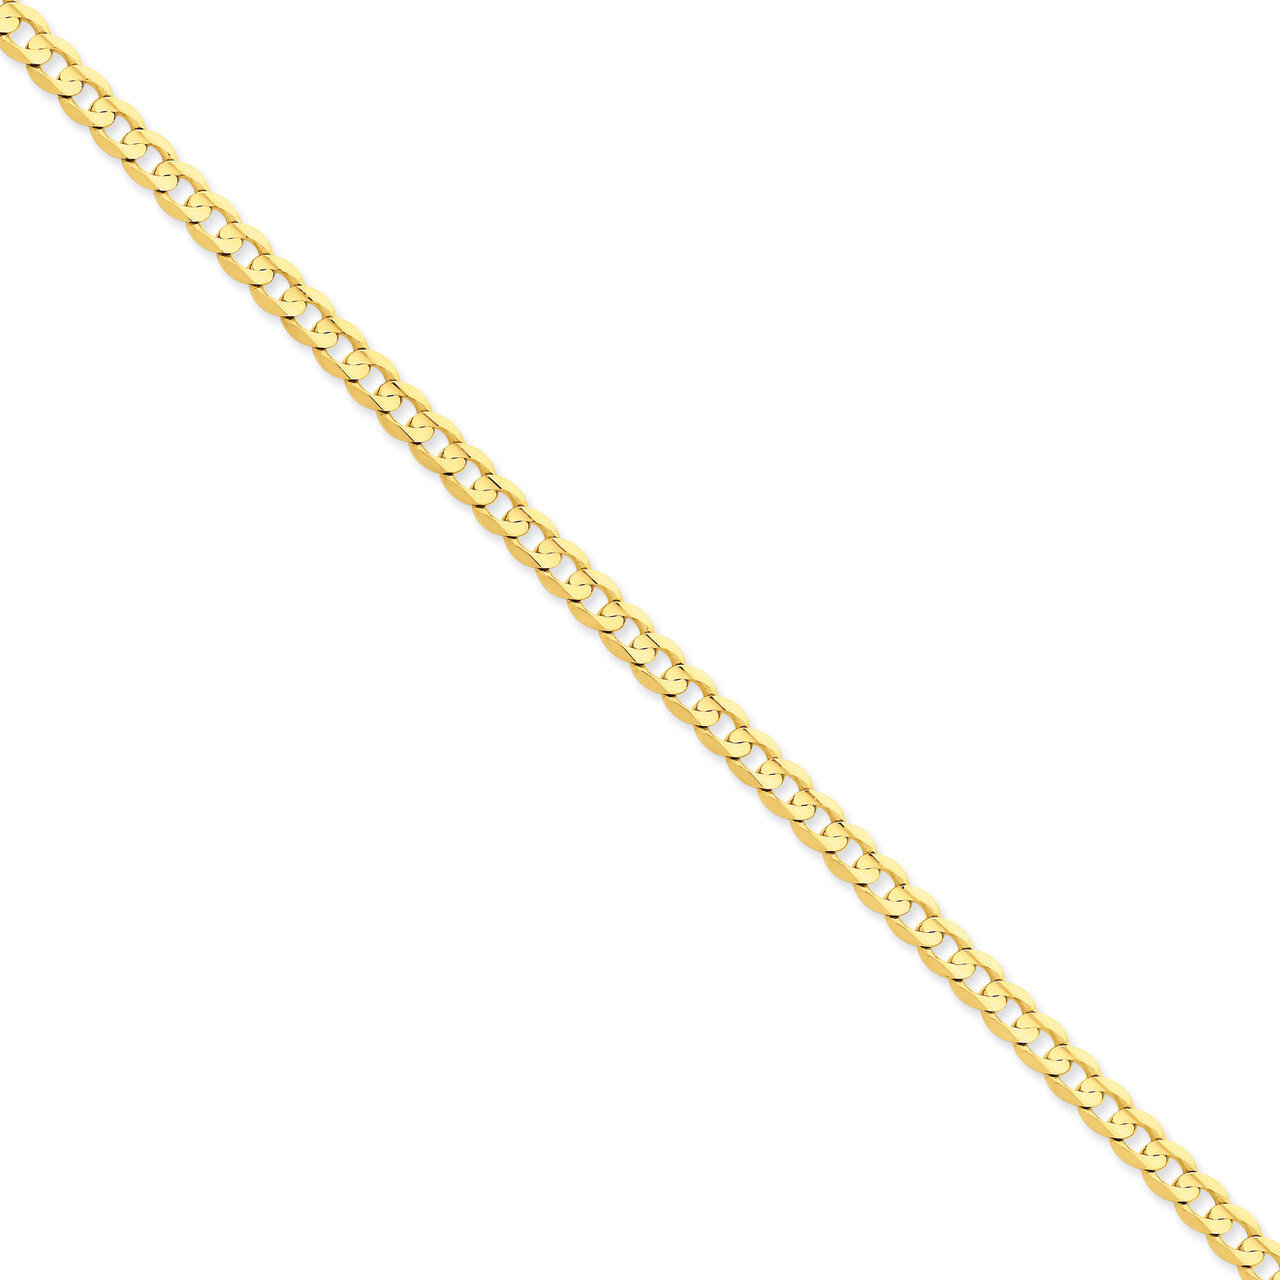 5.25mm Open Concave Curb Chain 22 Inch 14k Gold LCR140-22